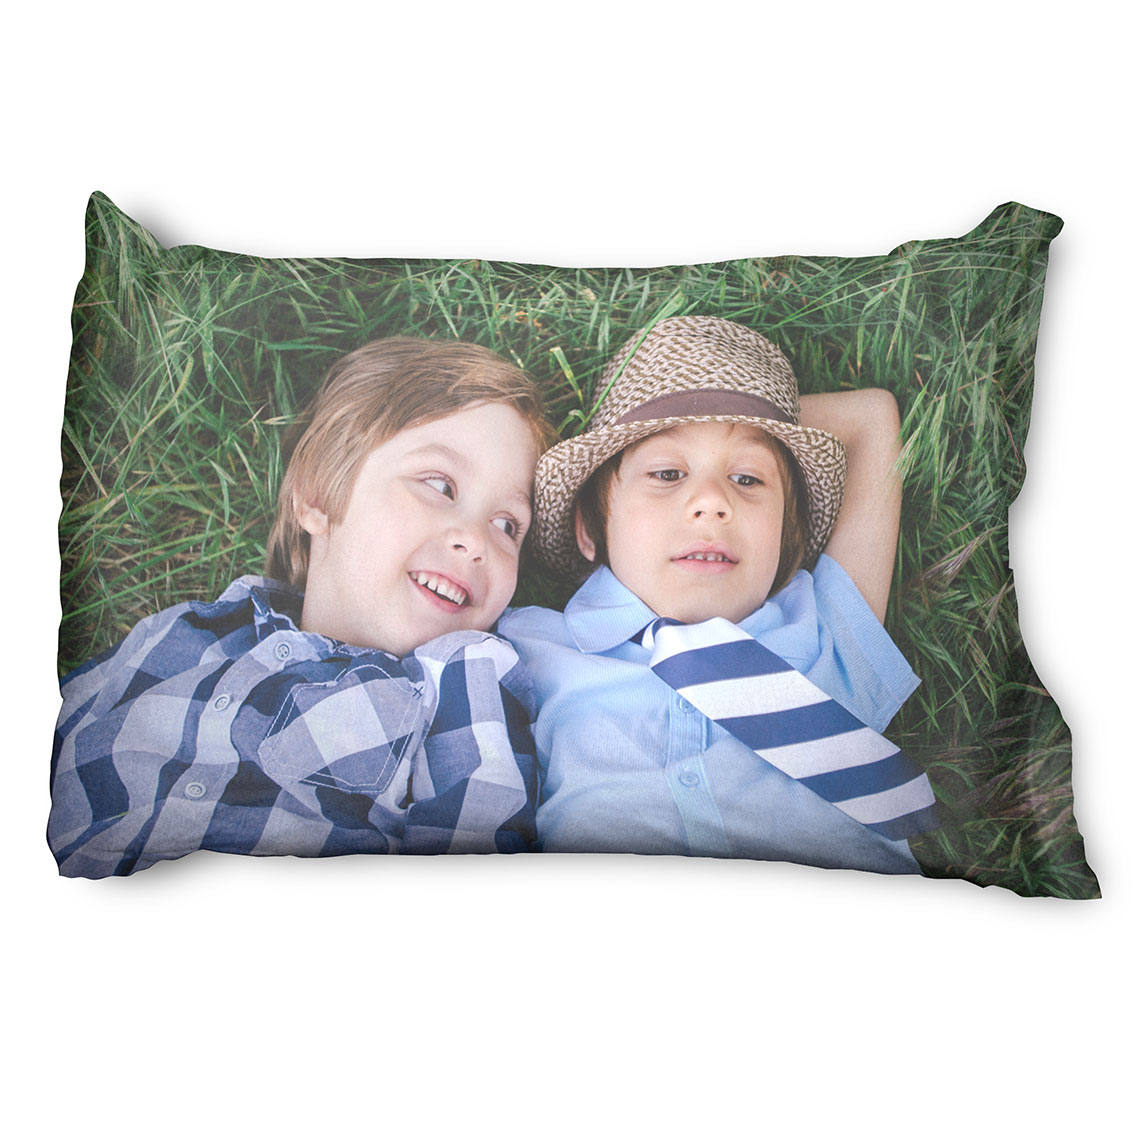 Personalized Pillow Pillow With Photo Personalized Throw Pillow